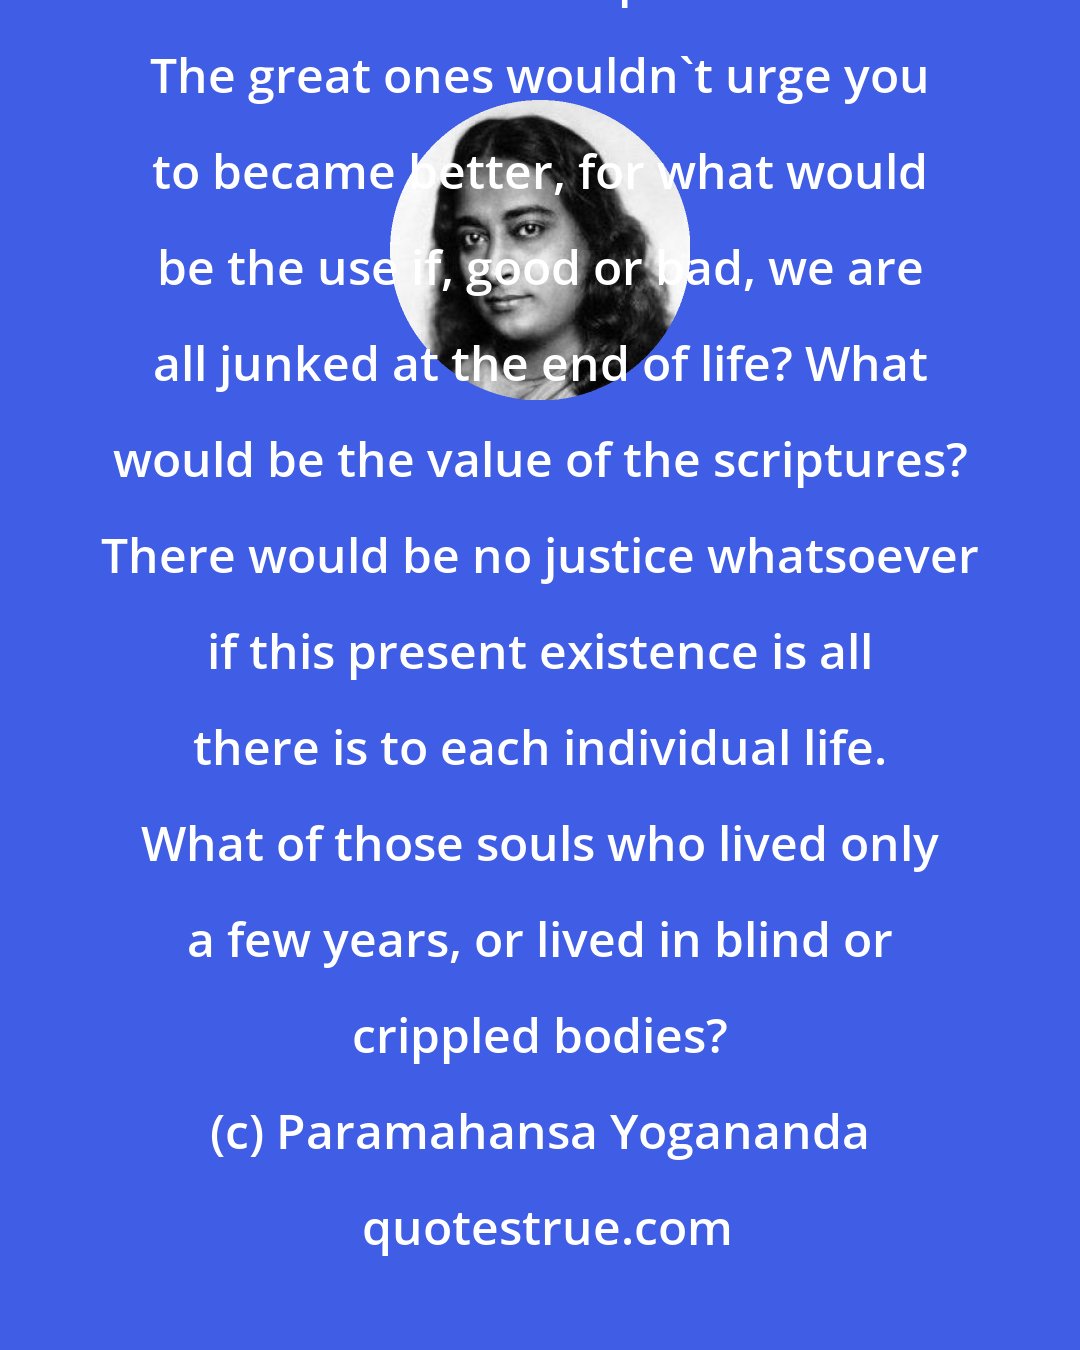 Paramahansa Yogananda: If death were the end, then there is no God, and there are no realised masters - it is all a pack of lies. The great ones wouldn't urge you to became better, for what would be the use if, good or bad, we are all junked at the end of life? What would be the value of the scriptures? There would be no justice whatsoever if this present existence is all there is to each individual life. What of those souls who lived only a few years, or lived in blind or crippled bodies?